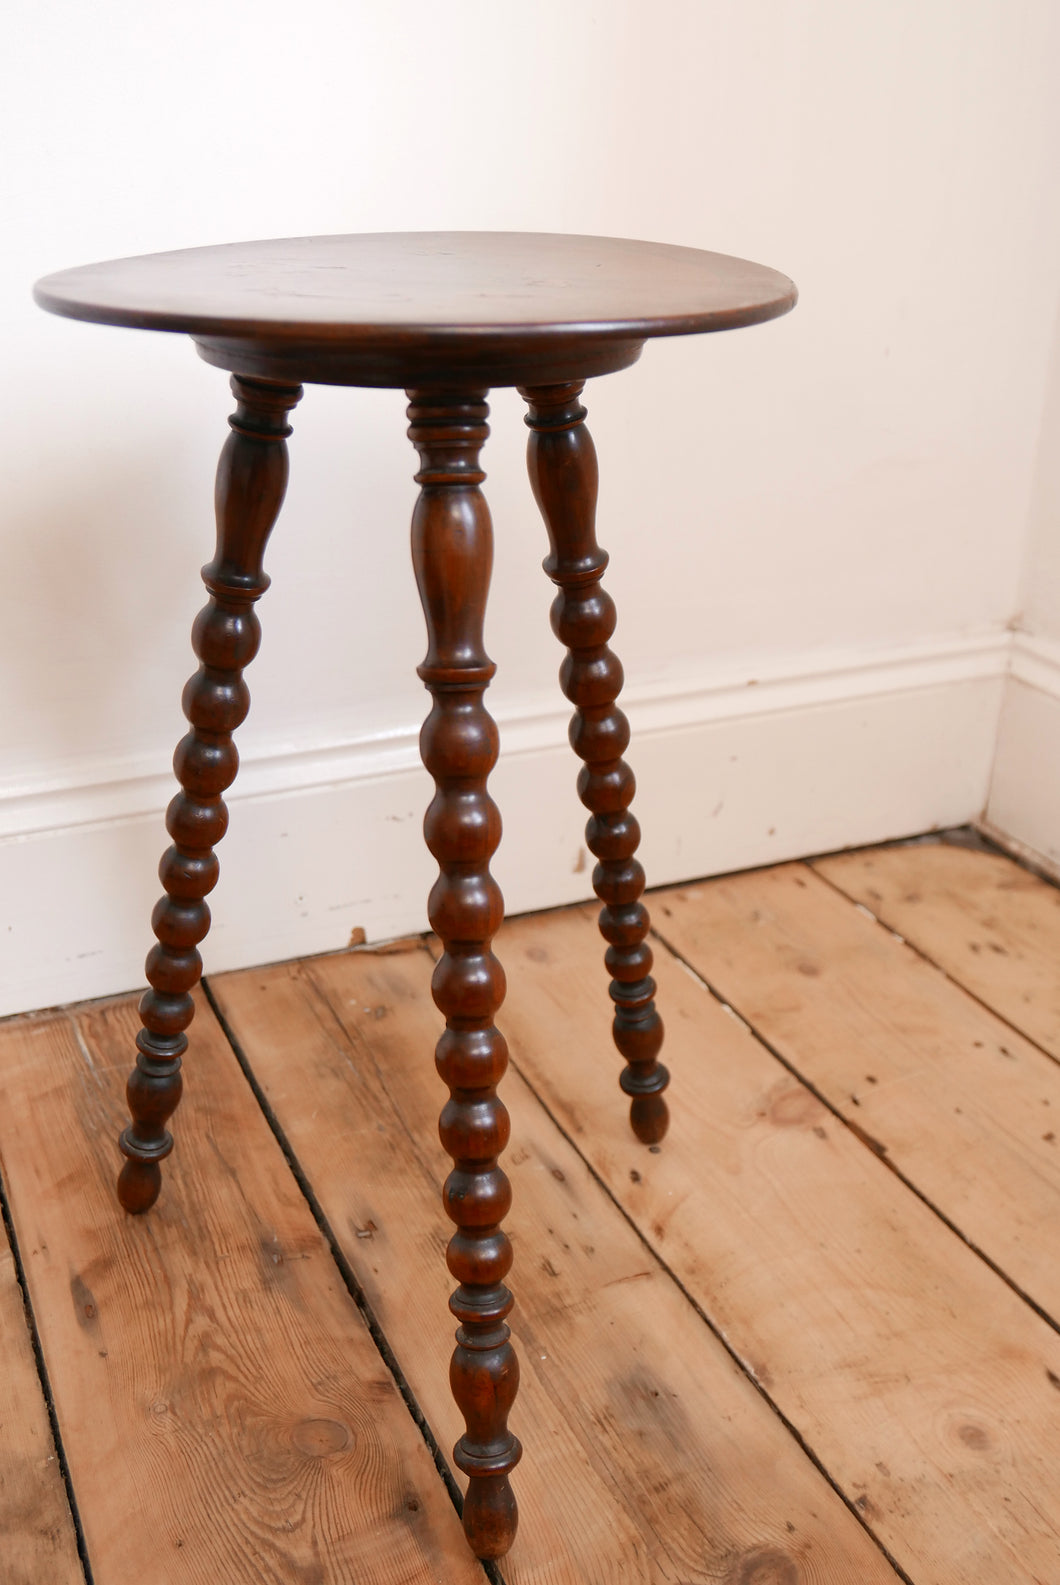 19th Century Sorrento-Ware Side Table With Bobbin Turned Legs